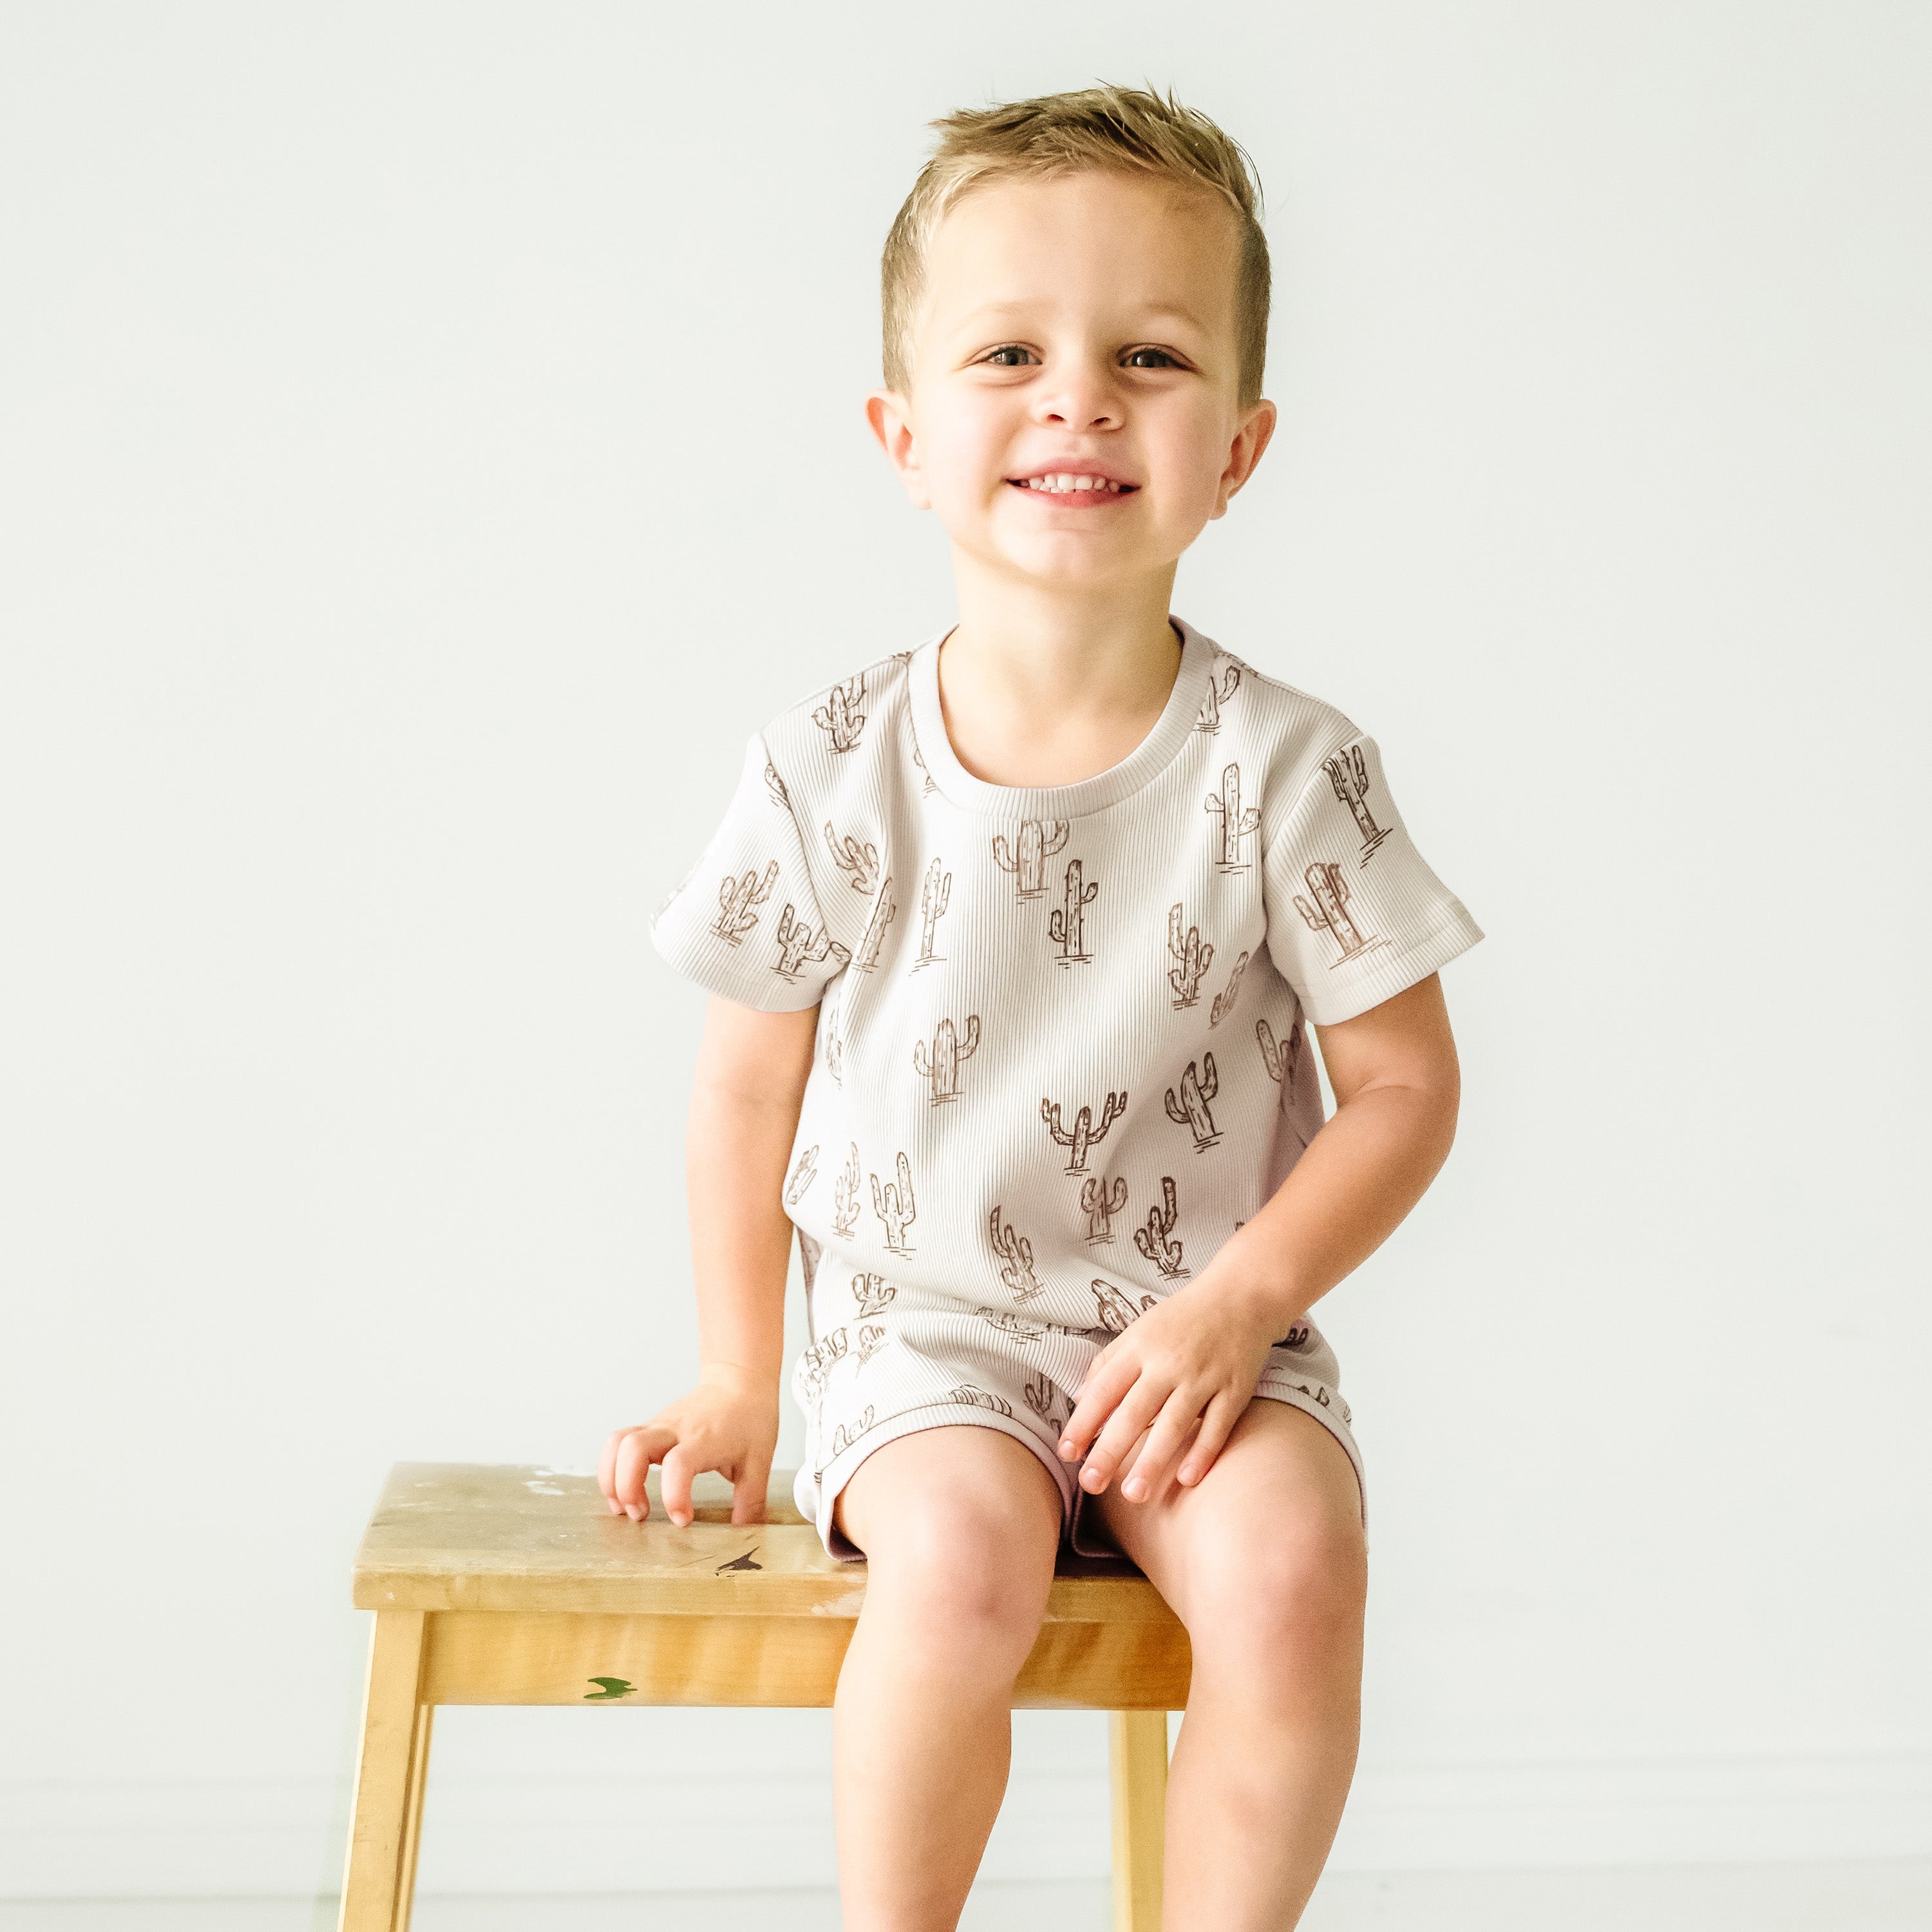 A cheerful young boy sits on a small wooden stool, wearing a white onesie patterned with cacti from the Makemake Organics Organic Tee and Shorties Set. He smiles brightly against a plain white background.